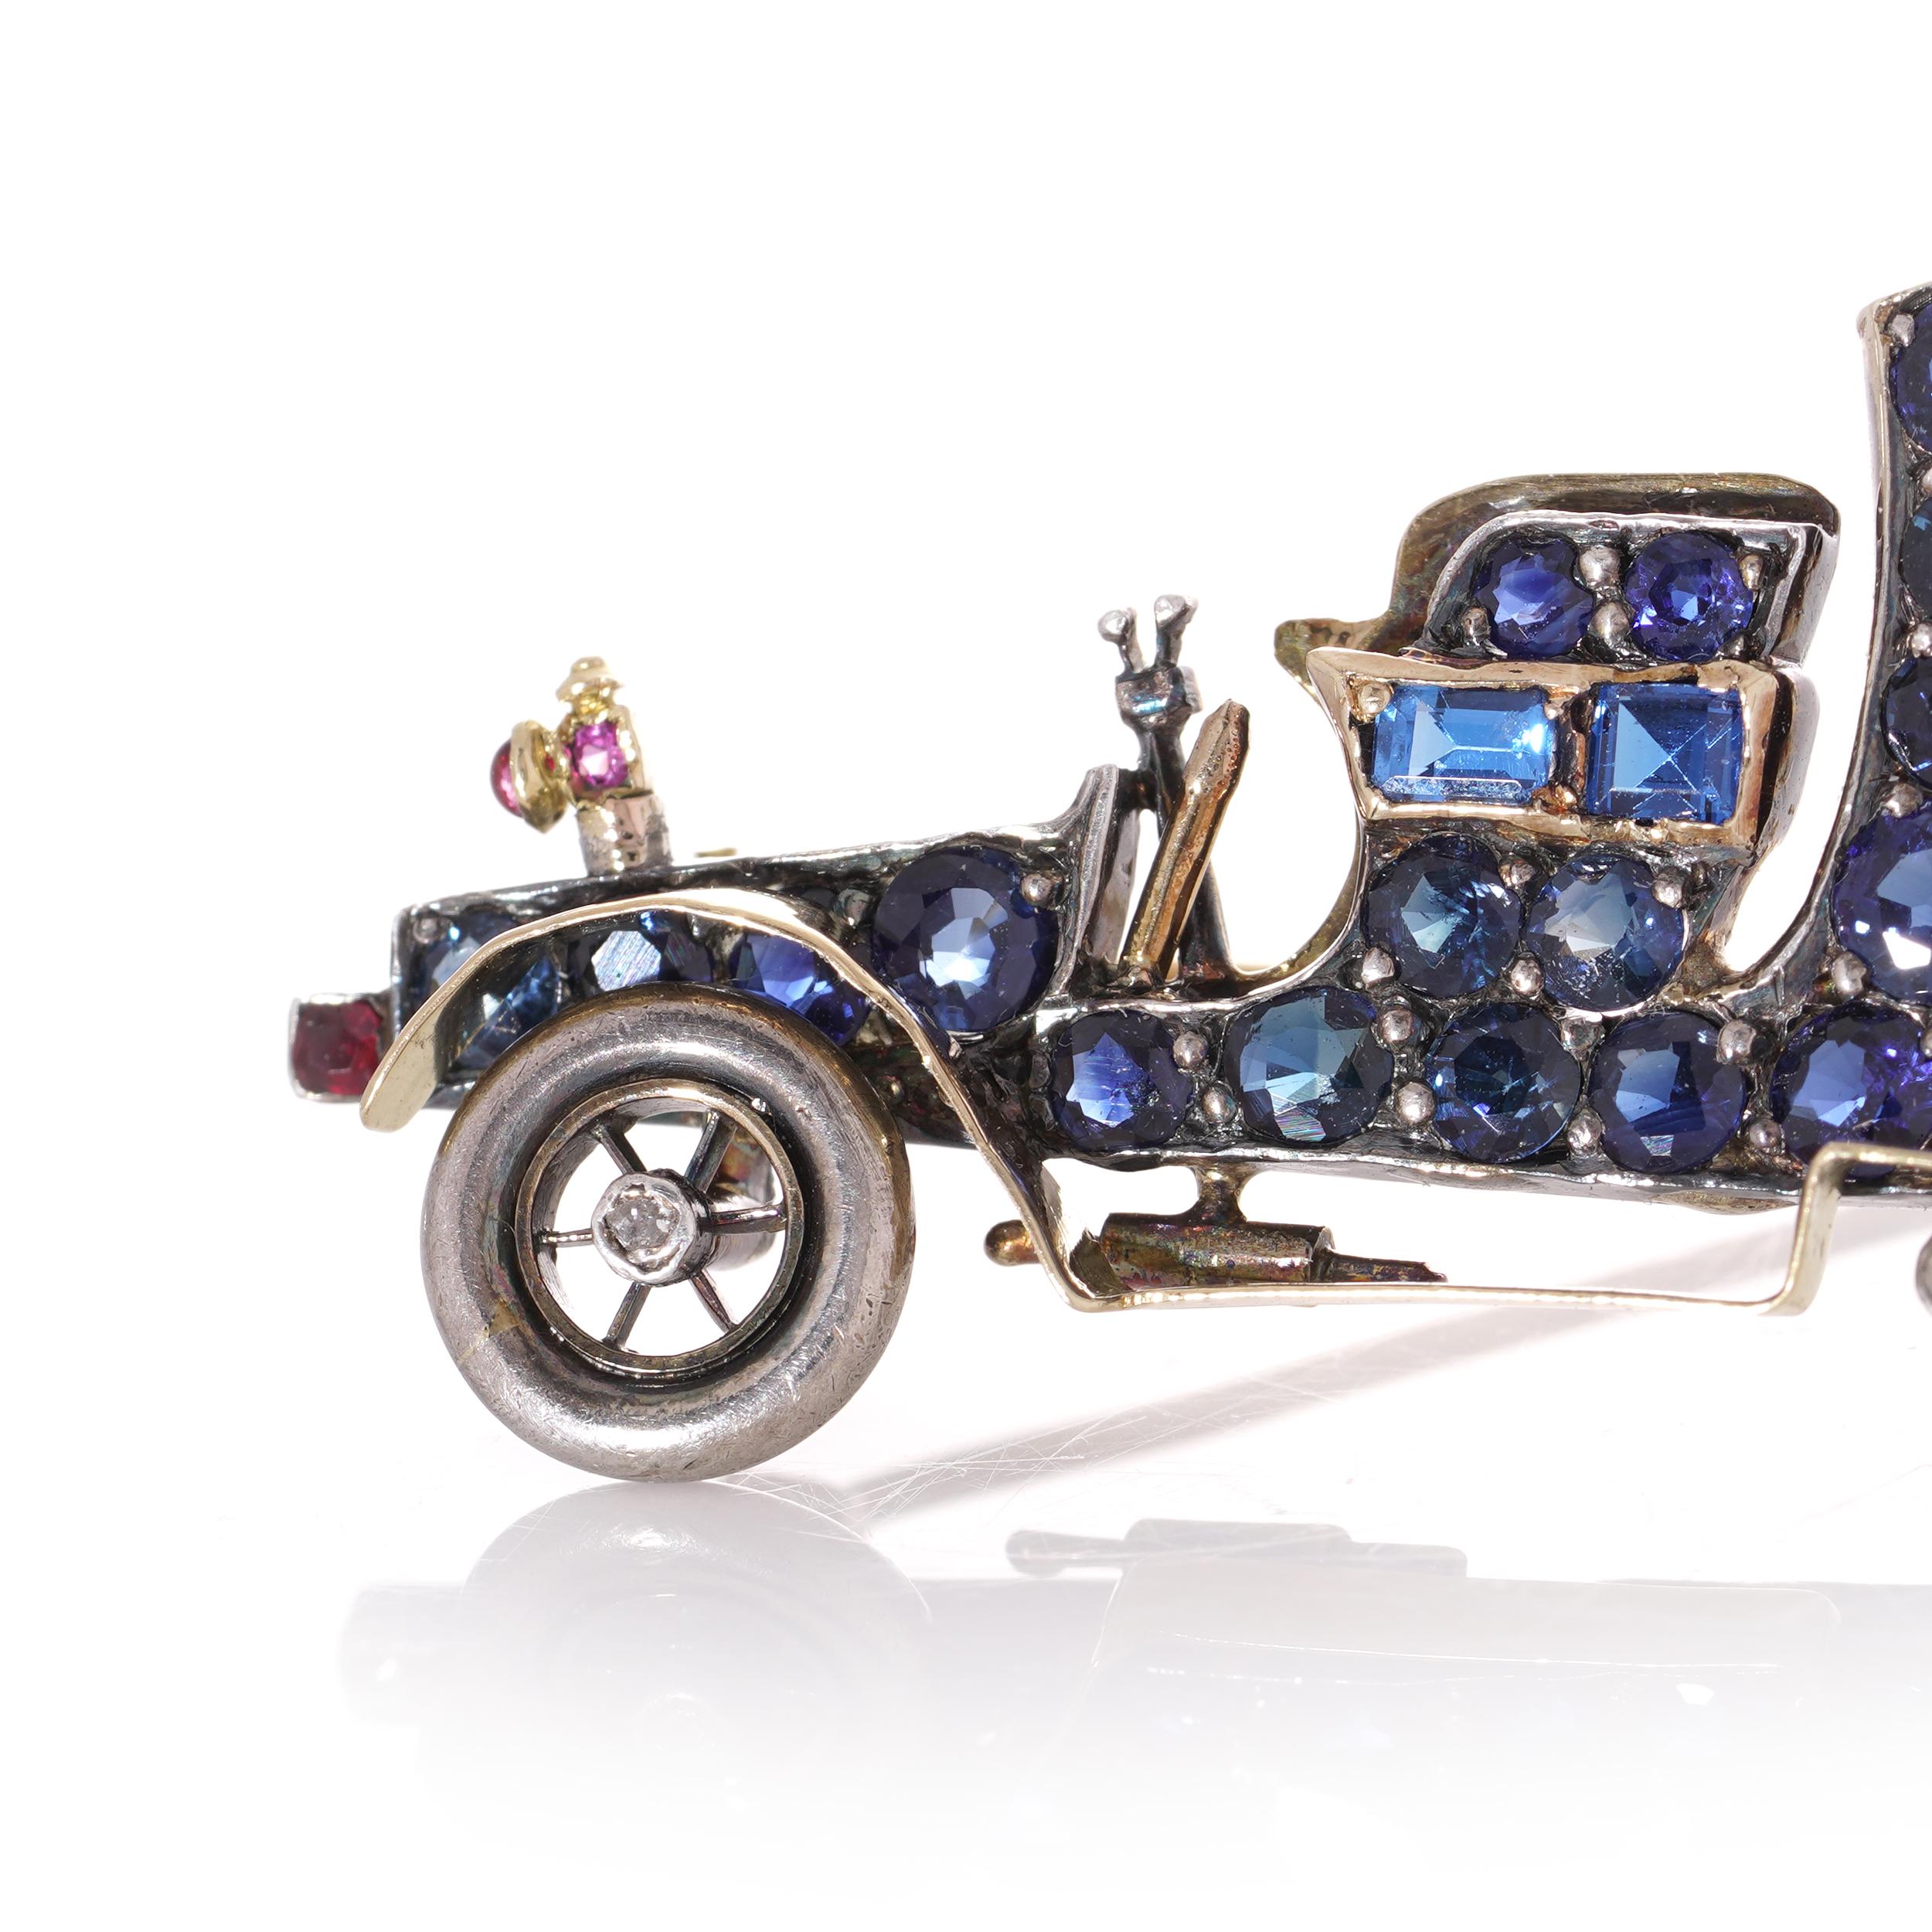 Antique Edwardian 15kt. yellow gold and silver car automobile brooch, set with blue sapphires. rubies and emerald.

Dimensions -
Weight: 11.8 grams
Size: Length x width x depth: 4.2 x 3.3 x 0.7 cm
Height: 4.2 cm

Sapphires -
Cut: Round faceted,